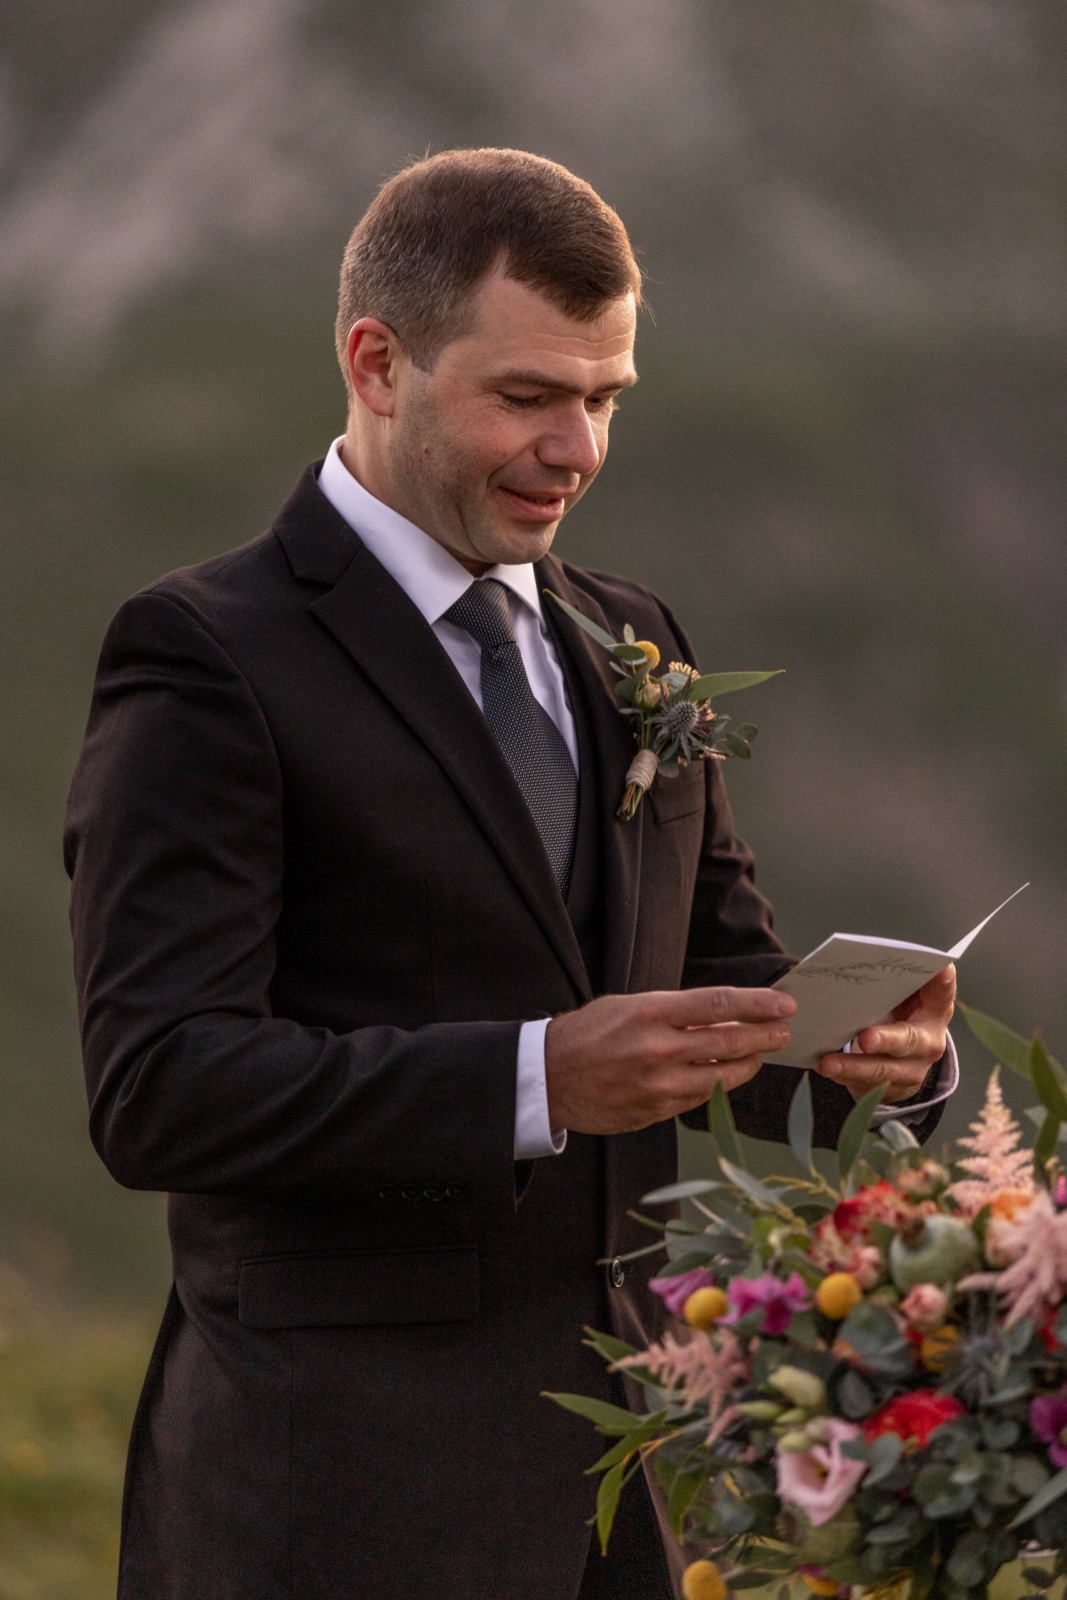 emotional vows at the sunrise elopement in Austria